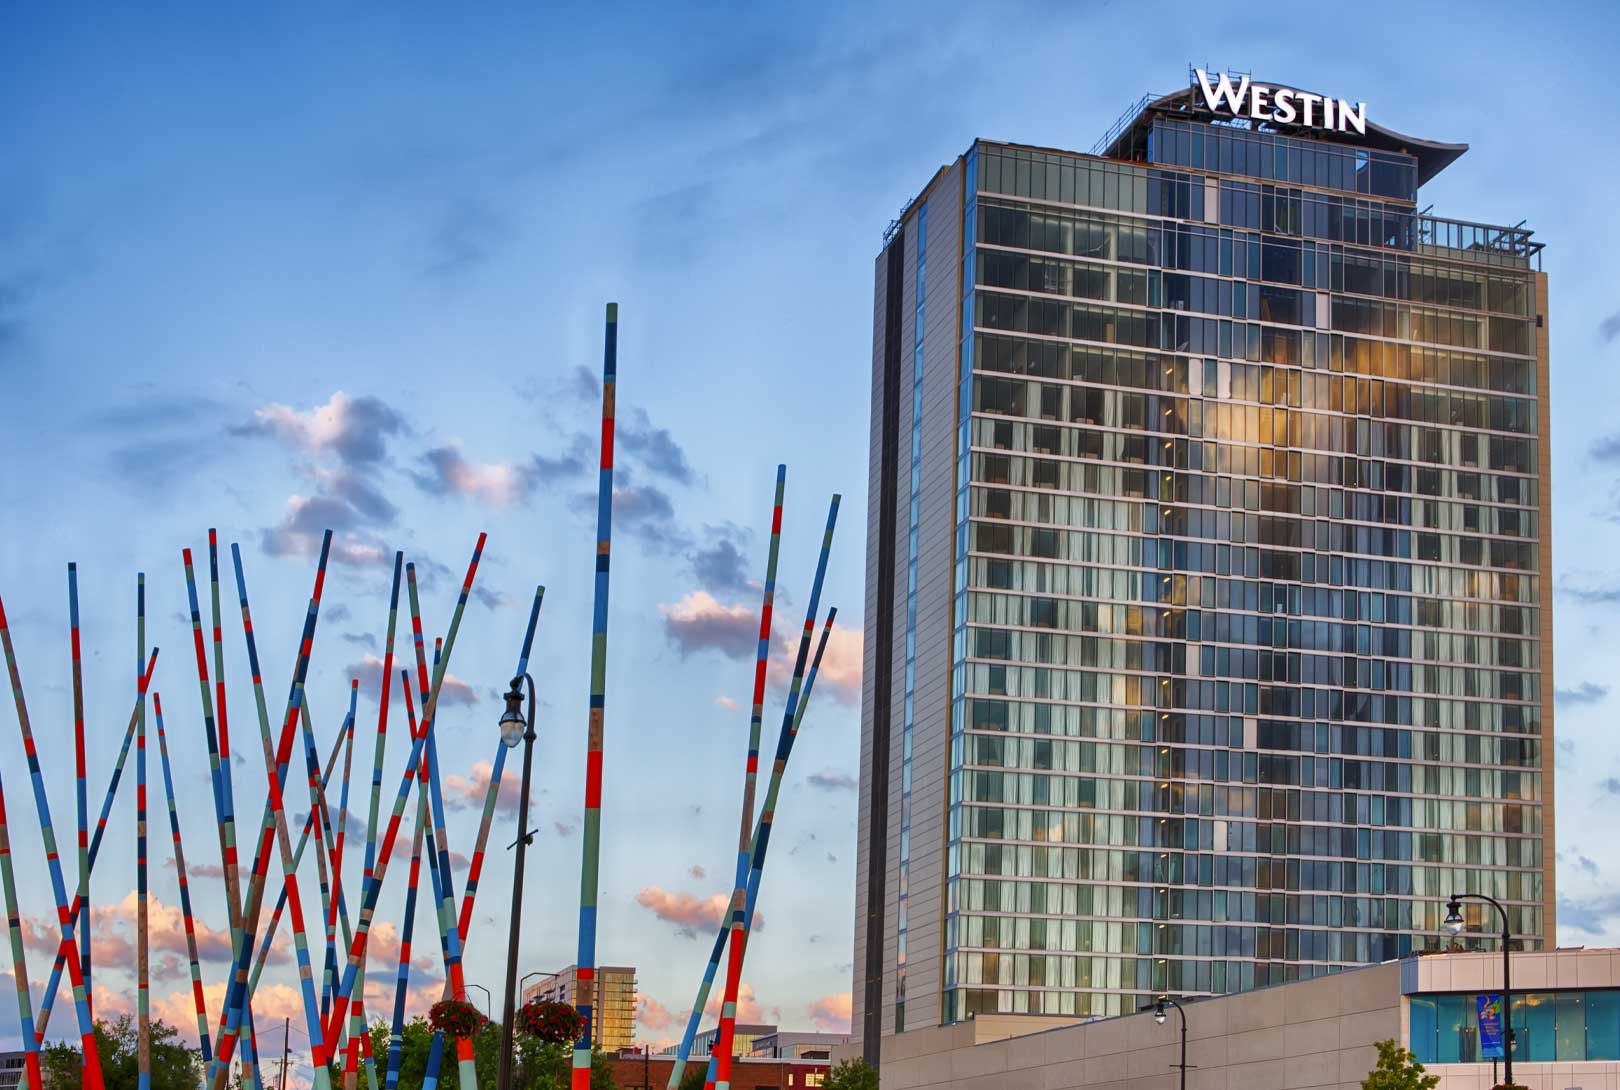 front of the Westin Hotel with the Nashville Stix sculpture in the foreground